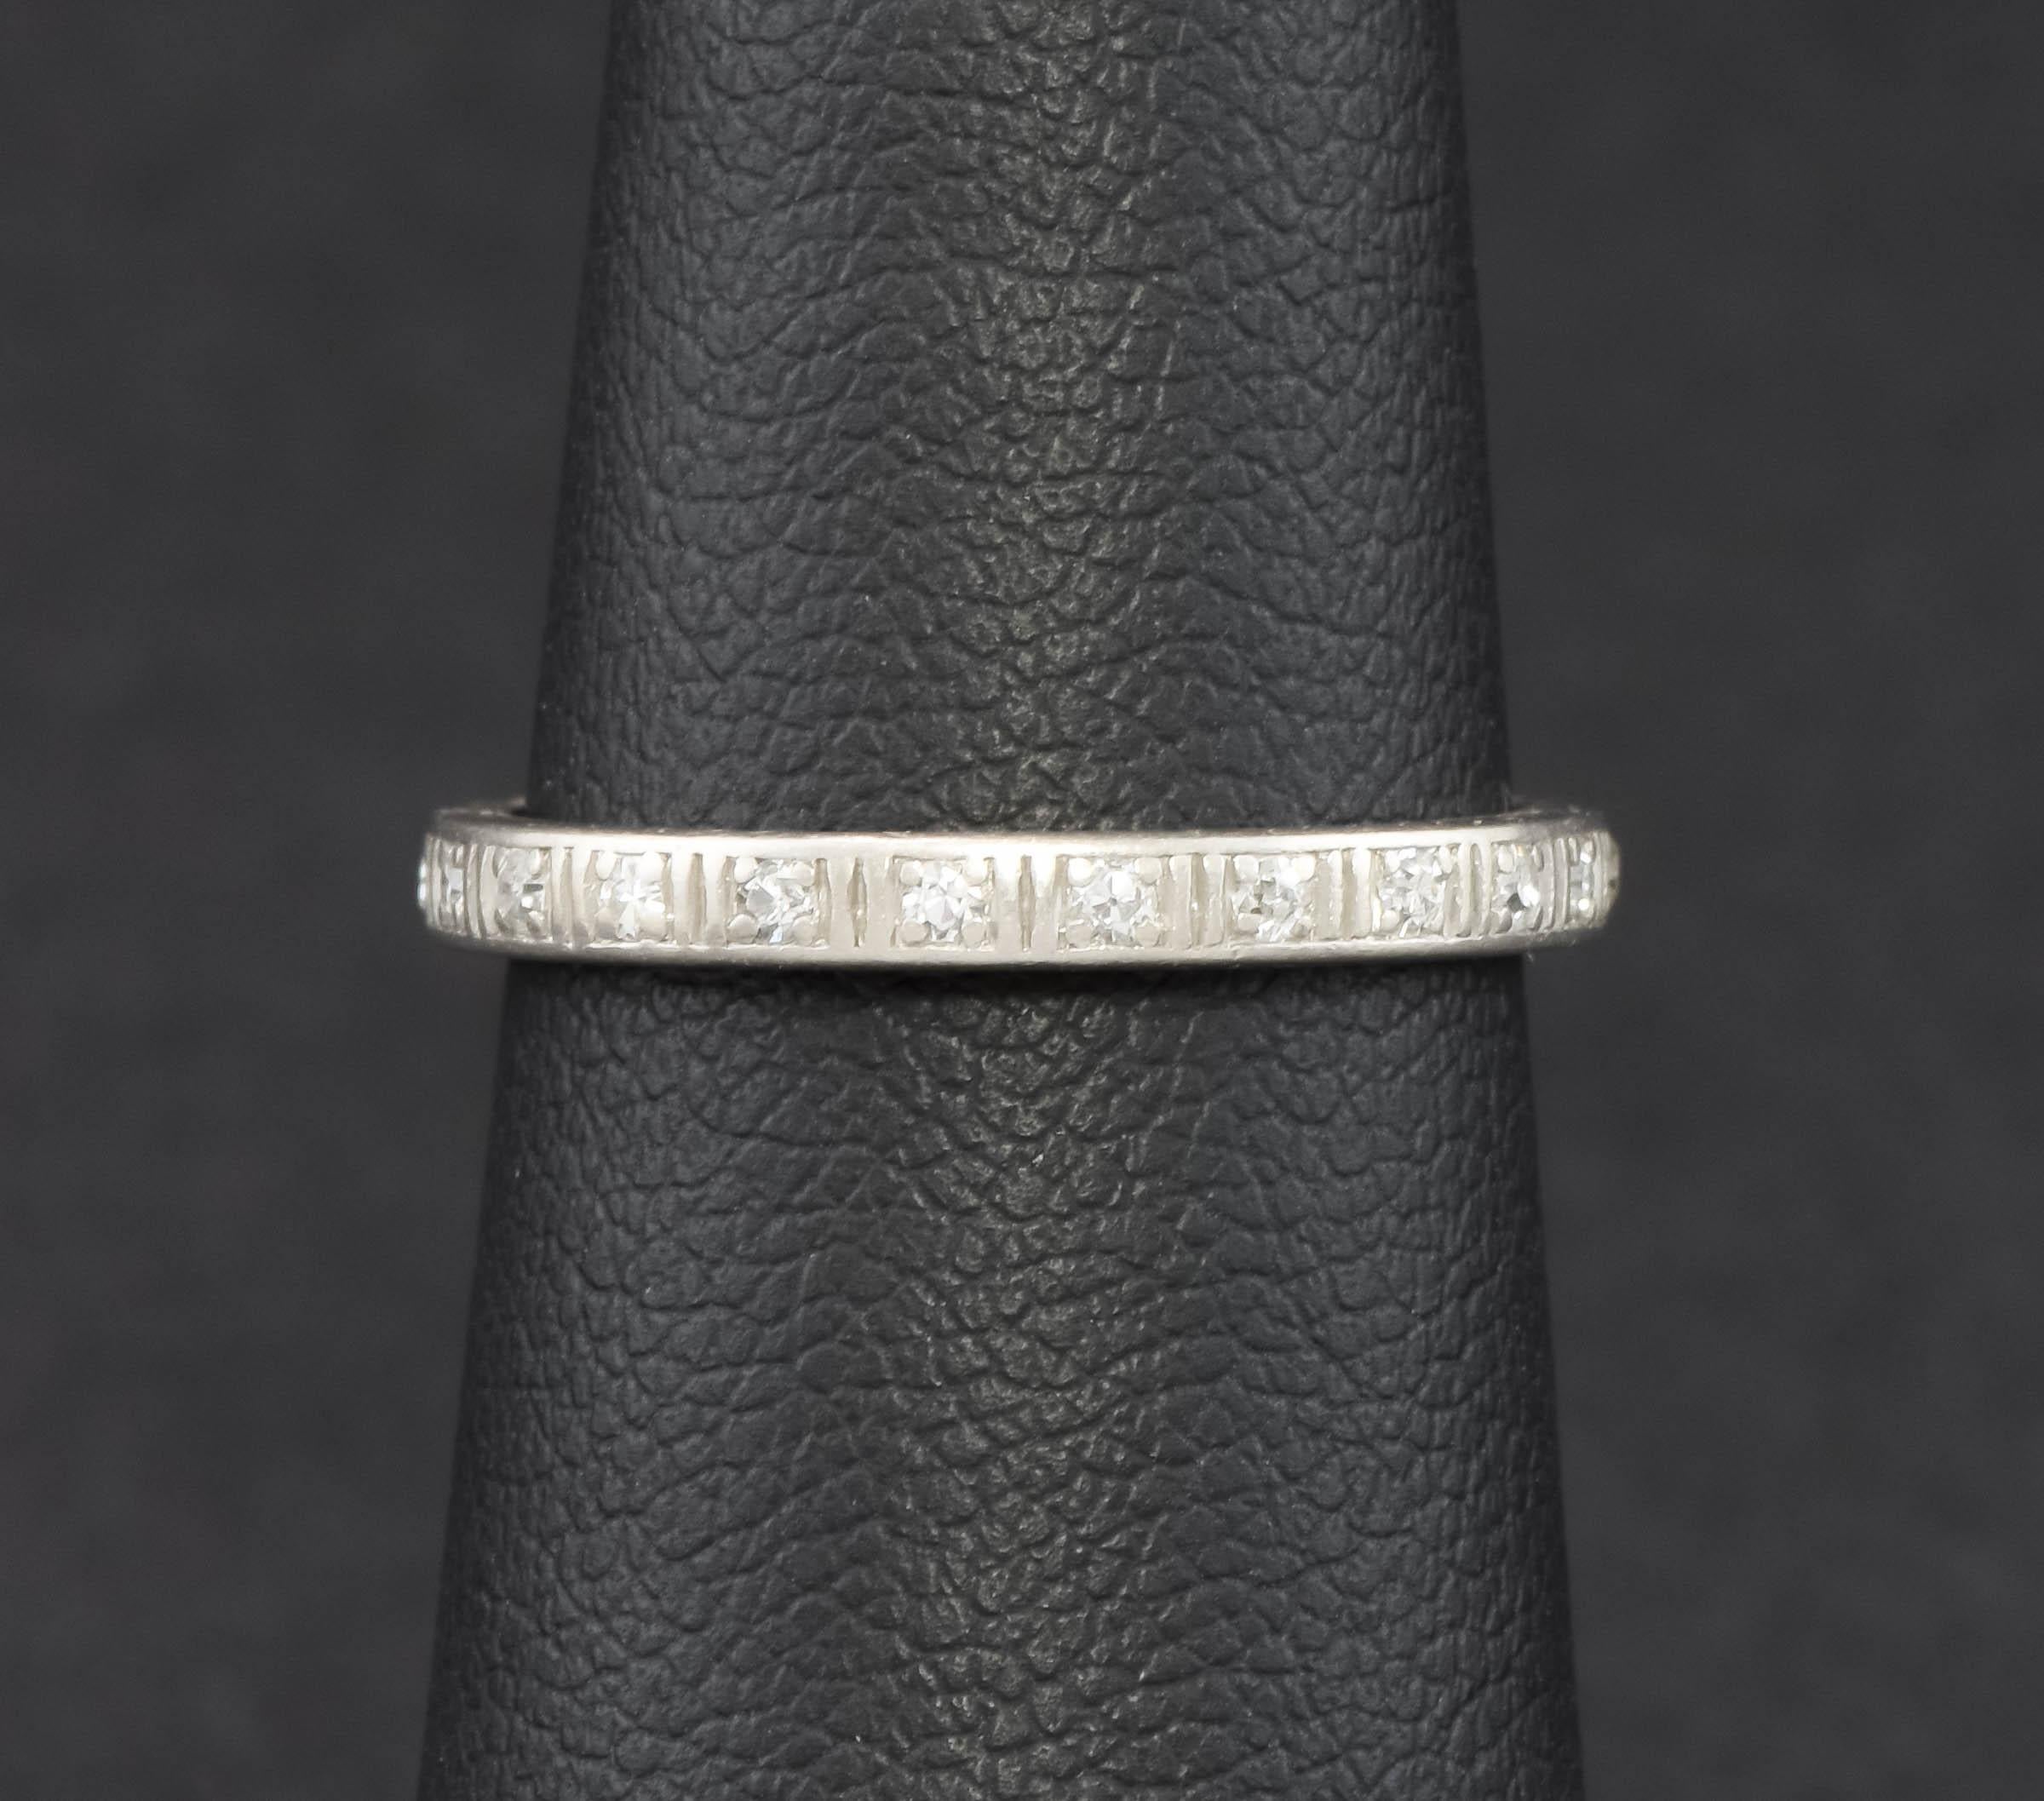 Offered is an original full eternity diamond wedding band ring dating to the Art Deco period.

Featuring 20 sparkly old single cut diamonds bead-set around the slender platinum band, the total estimated carat weight is approximately .165 carats. 